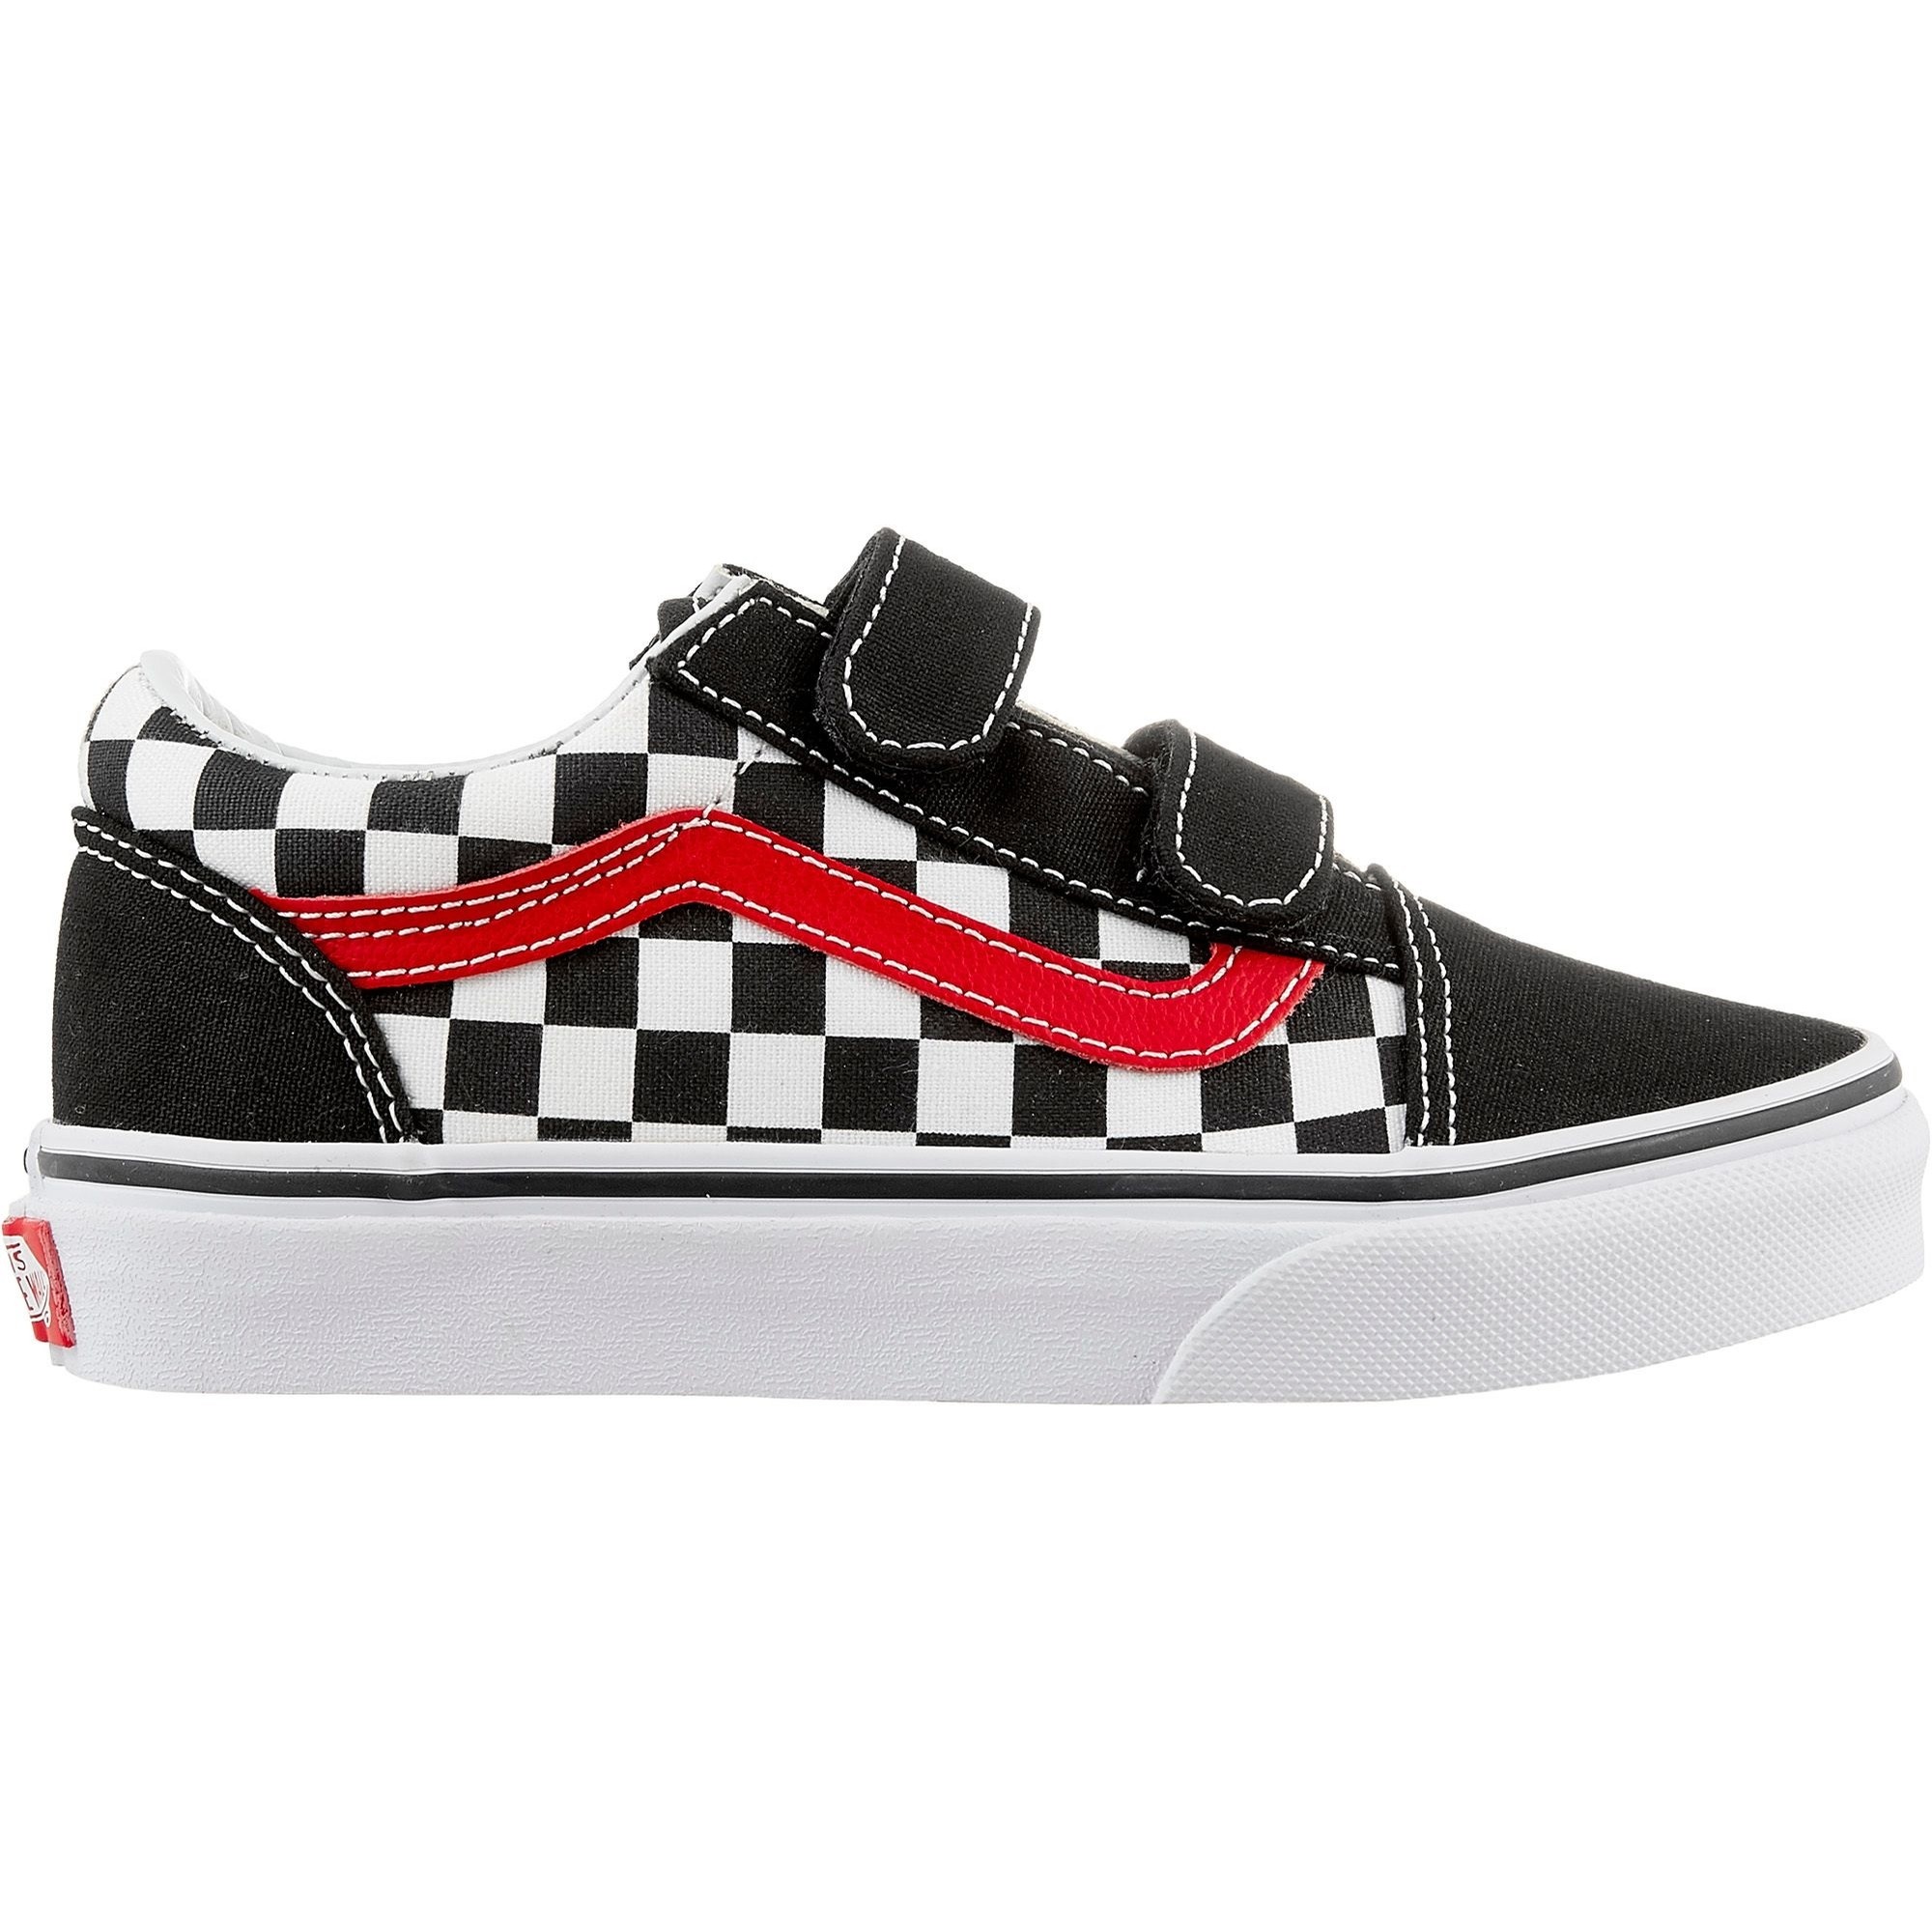 red and white checkered old skool vans